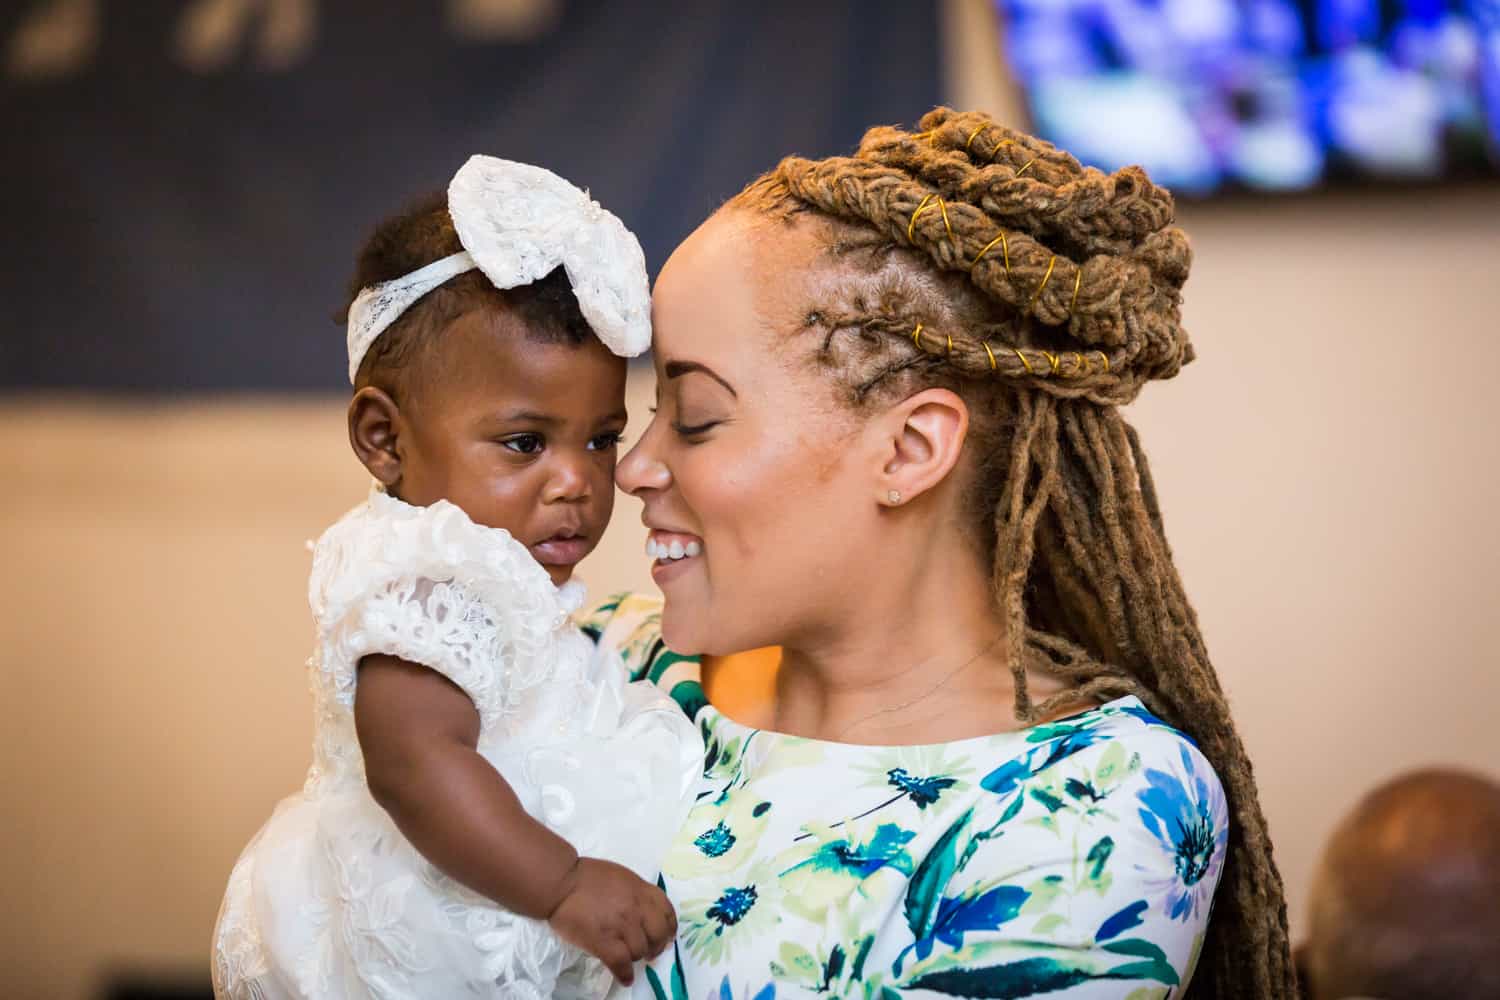 Woman with braided hair nuzzling with little baby girl